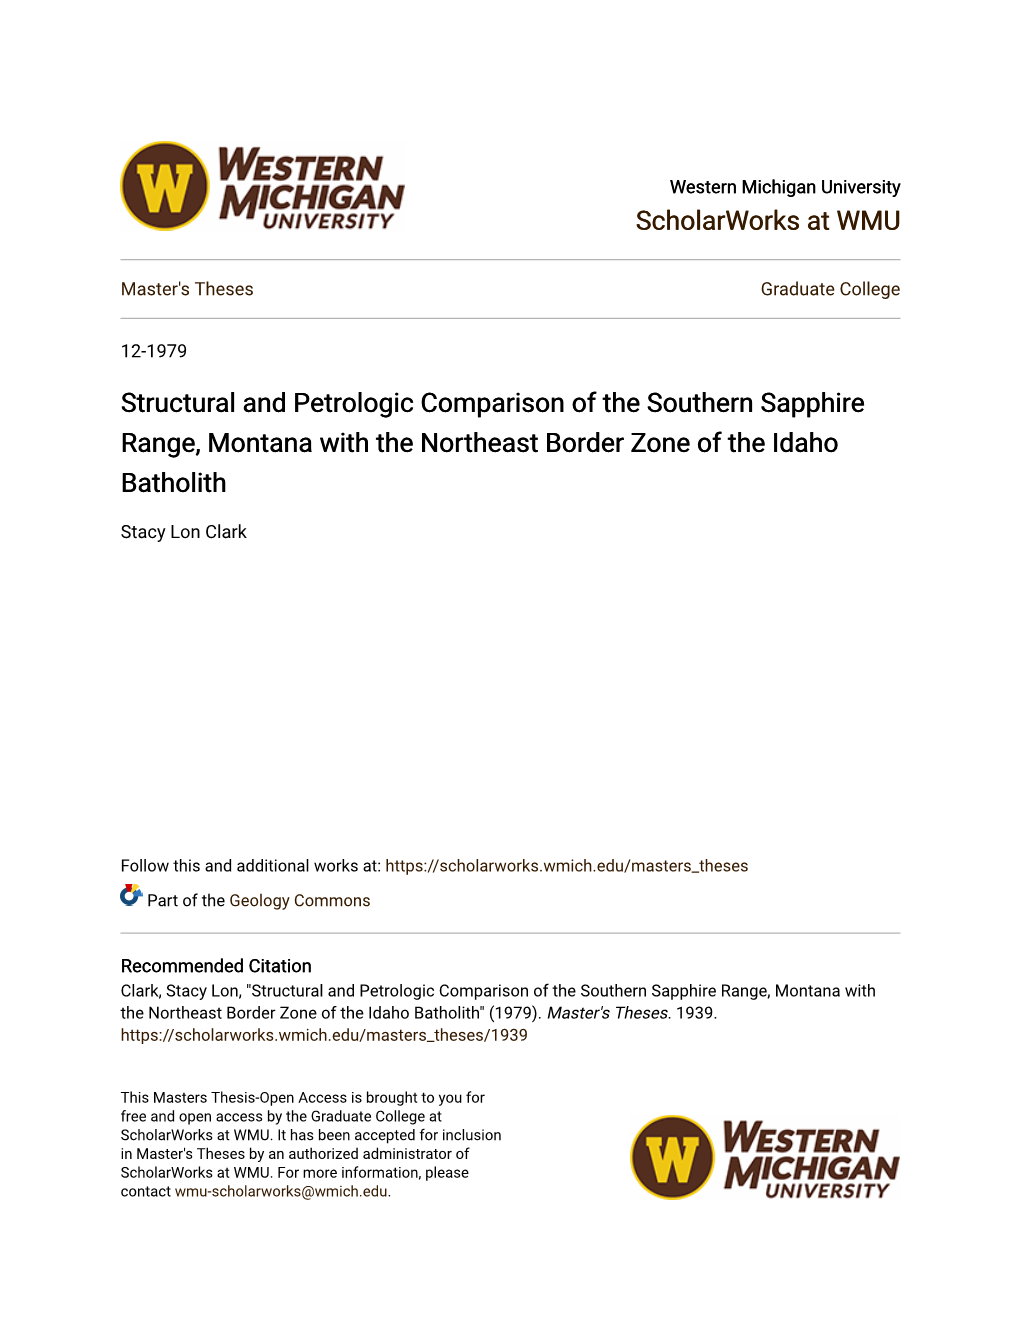 Structural and Petrologic Comparison of the Southern Sapphire Range, Montana with the Northeast Border Zone of the Idaho Batholith